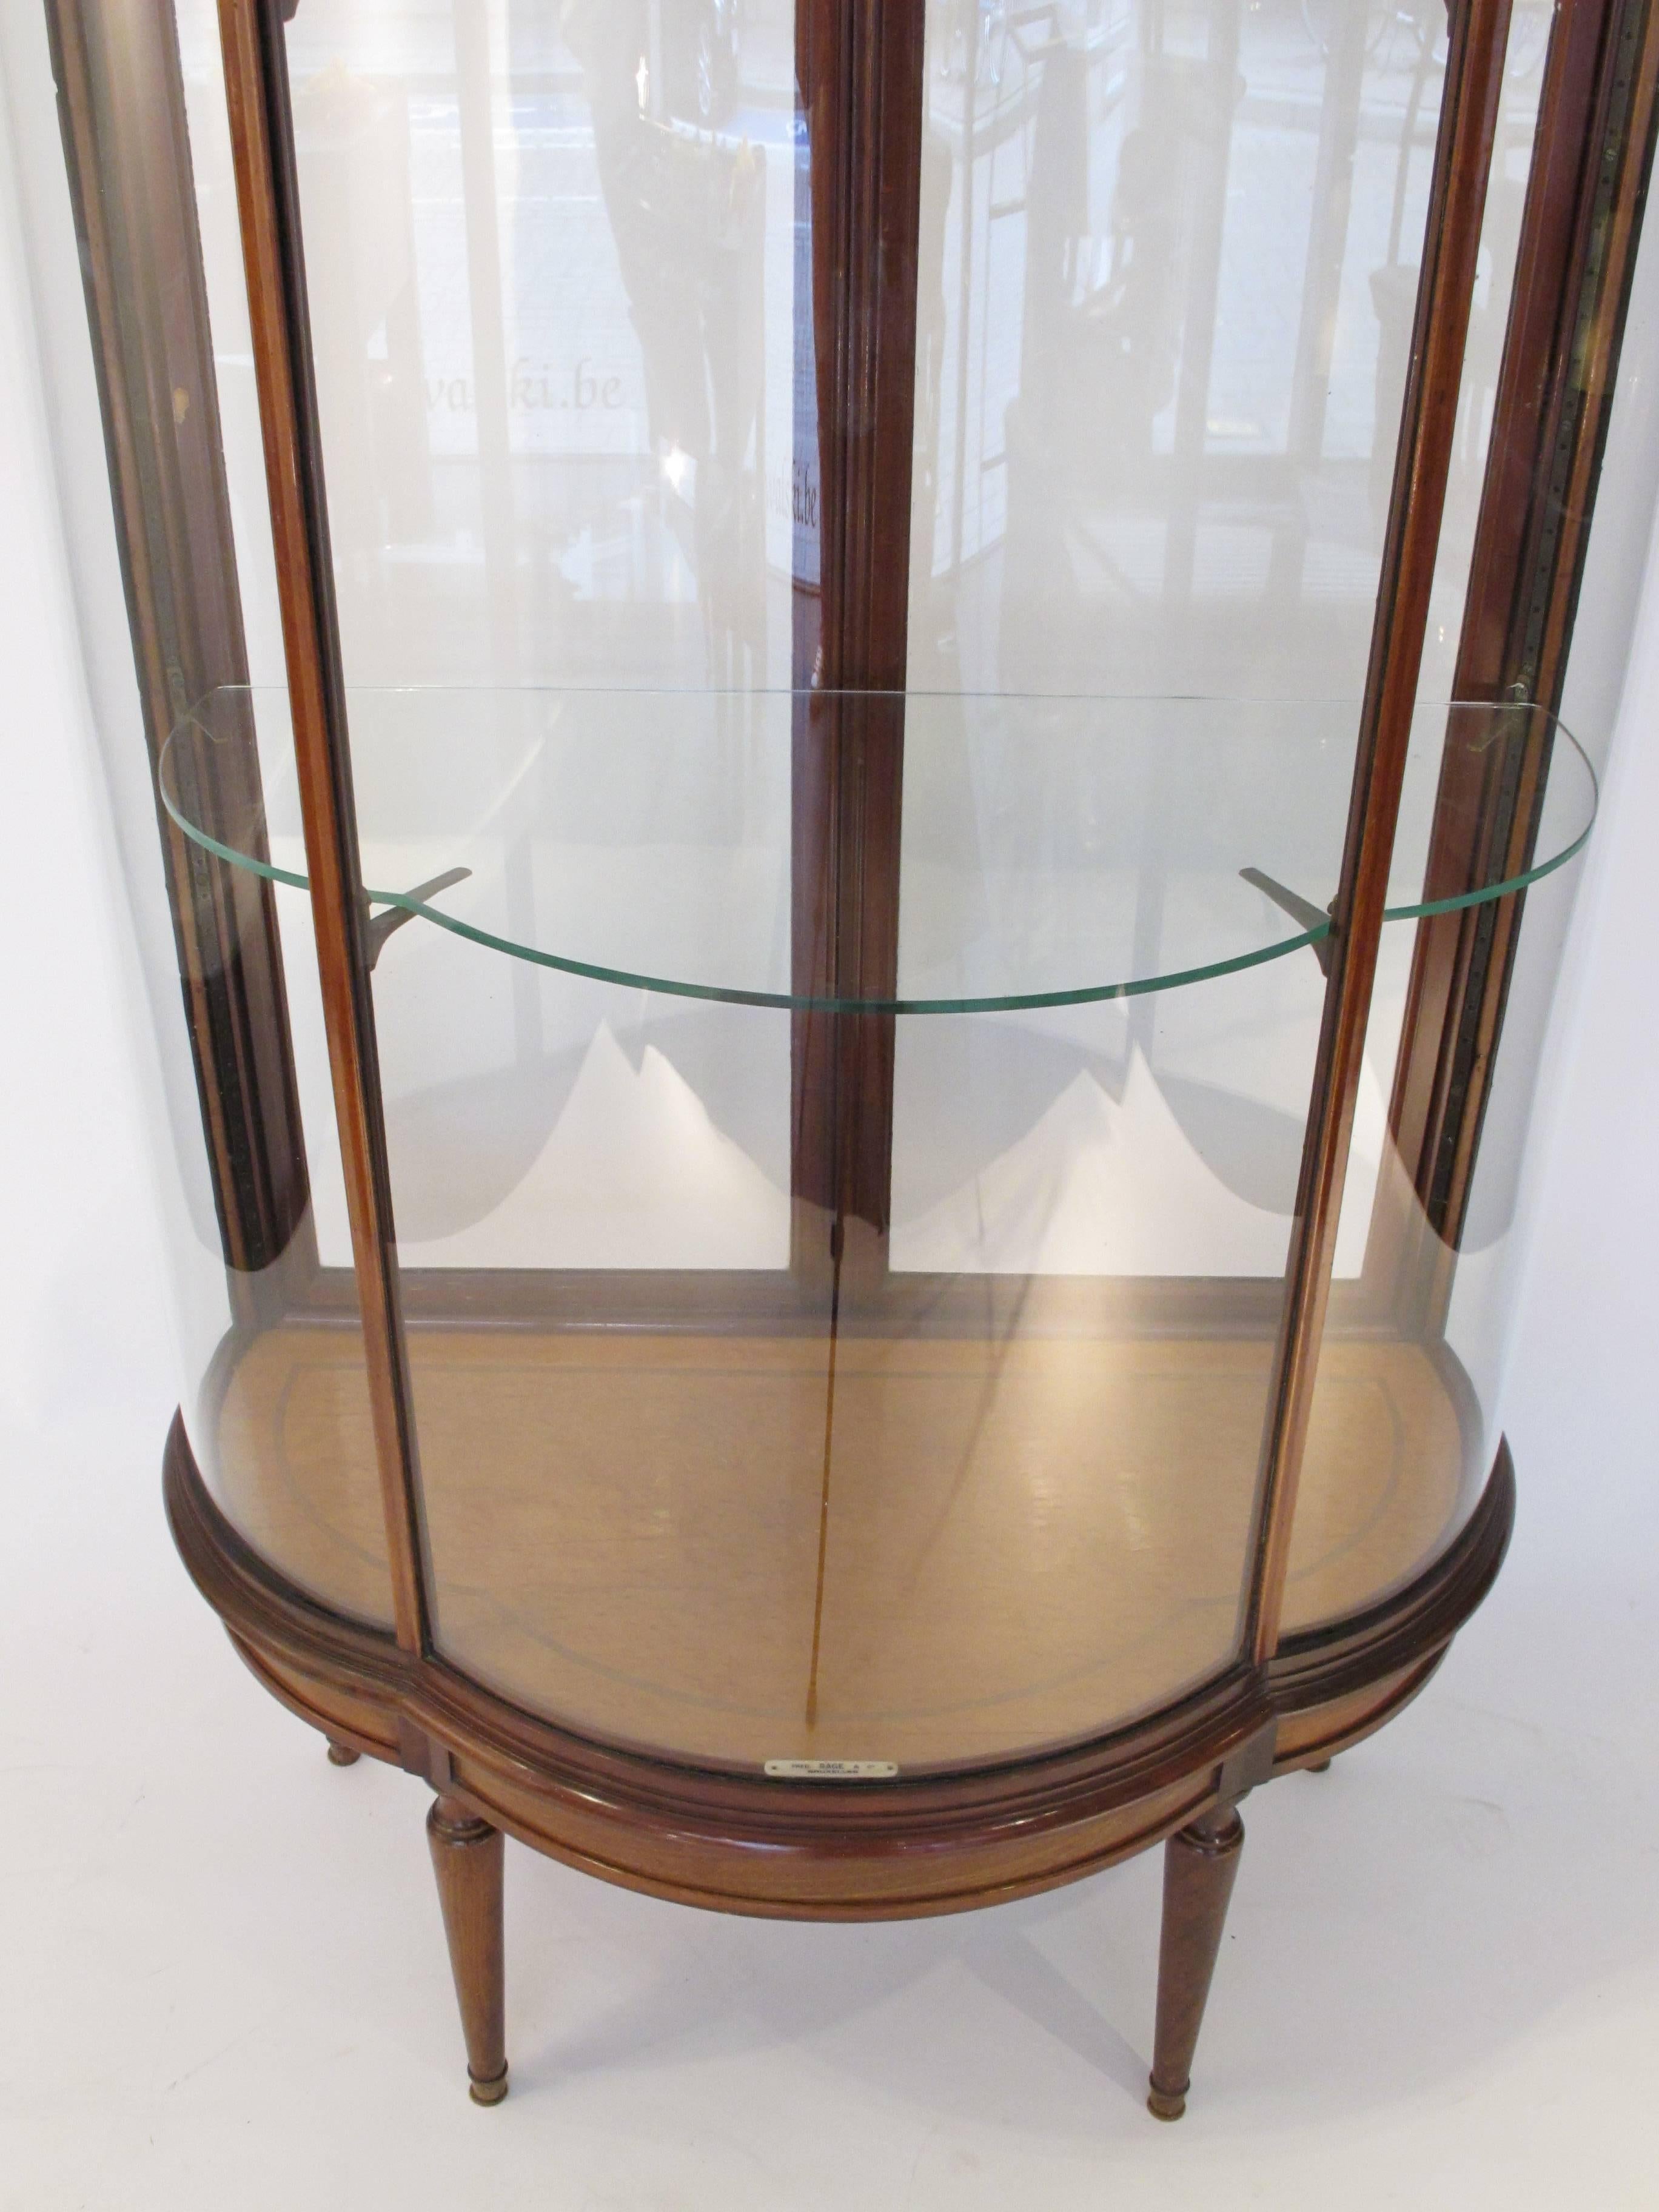 Rare English early 20th century, mahogany and glass display case with fabulous curved glass and a unique glass top which allows for natural light, as well as two adjustable glass shelves. Beautifully scaled with unique air-tight locking